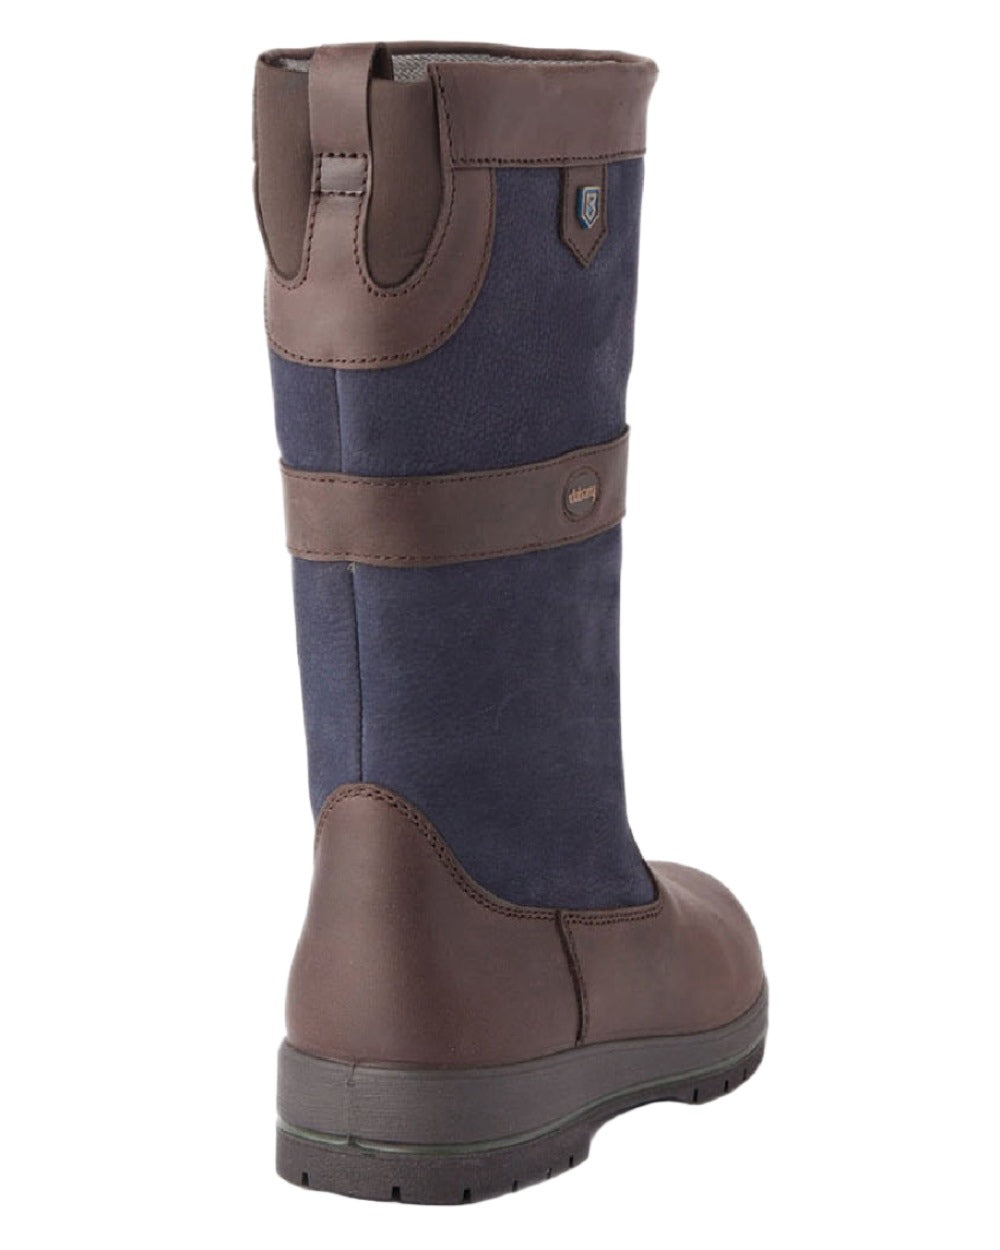 Navy/Brown coloured Dubarry Kildare Country Boots on white background 